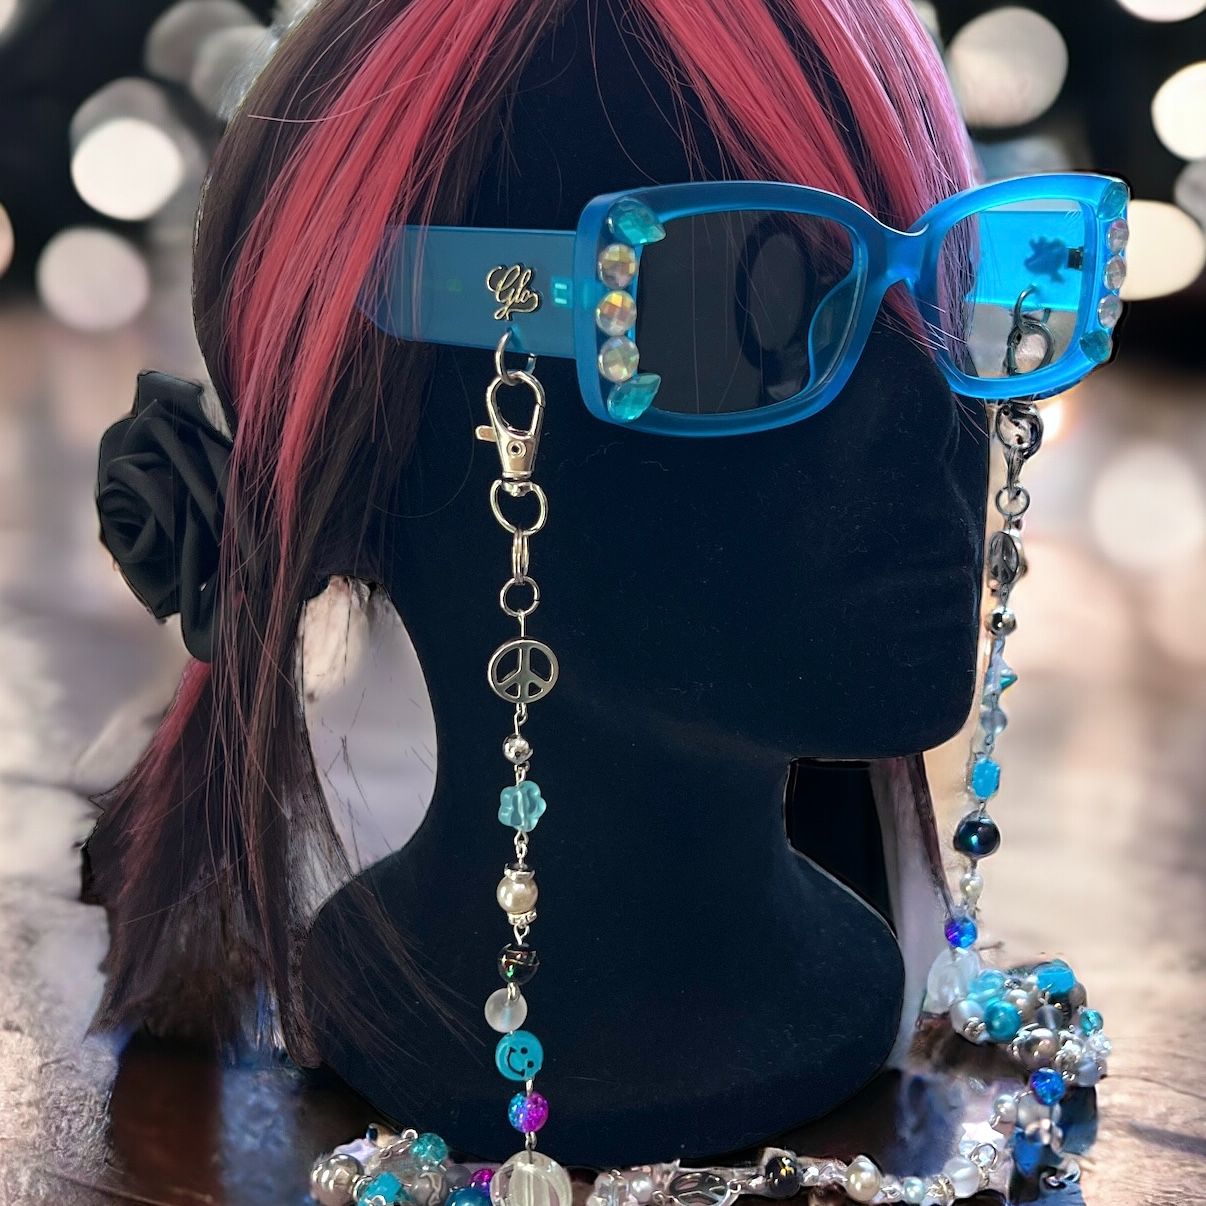 Glam Hippie Blue Festival Rave Sunglasses with Matching Glasses Chain